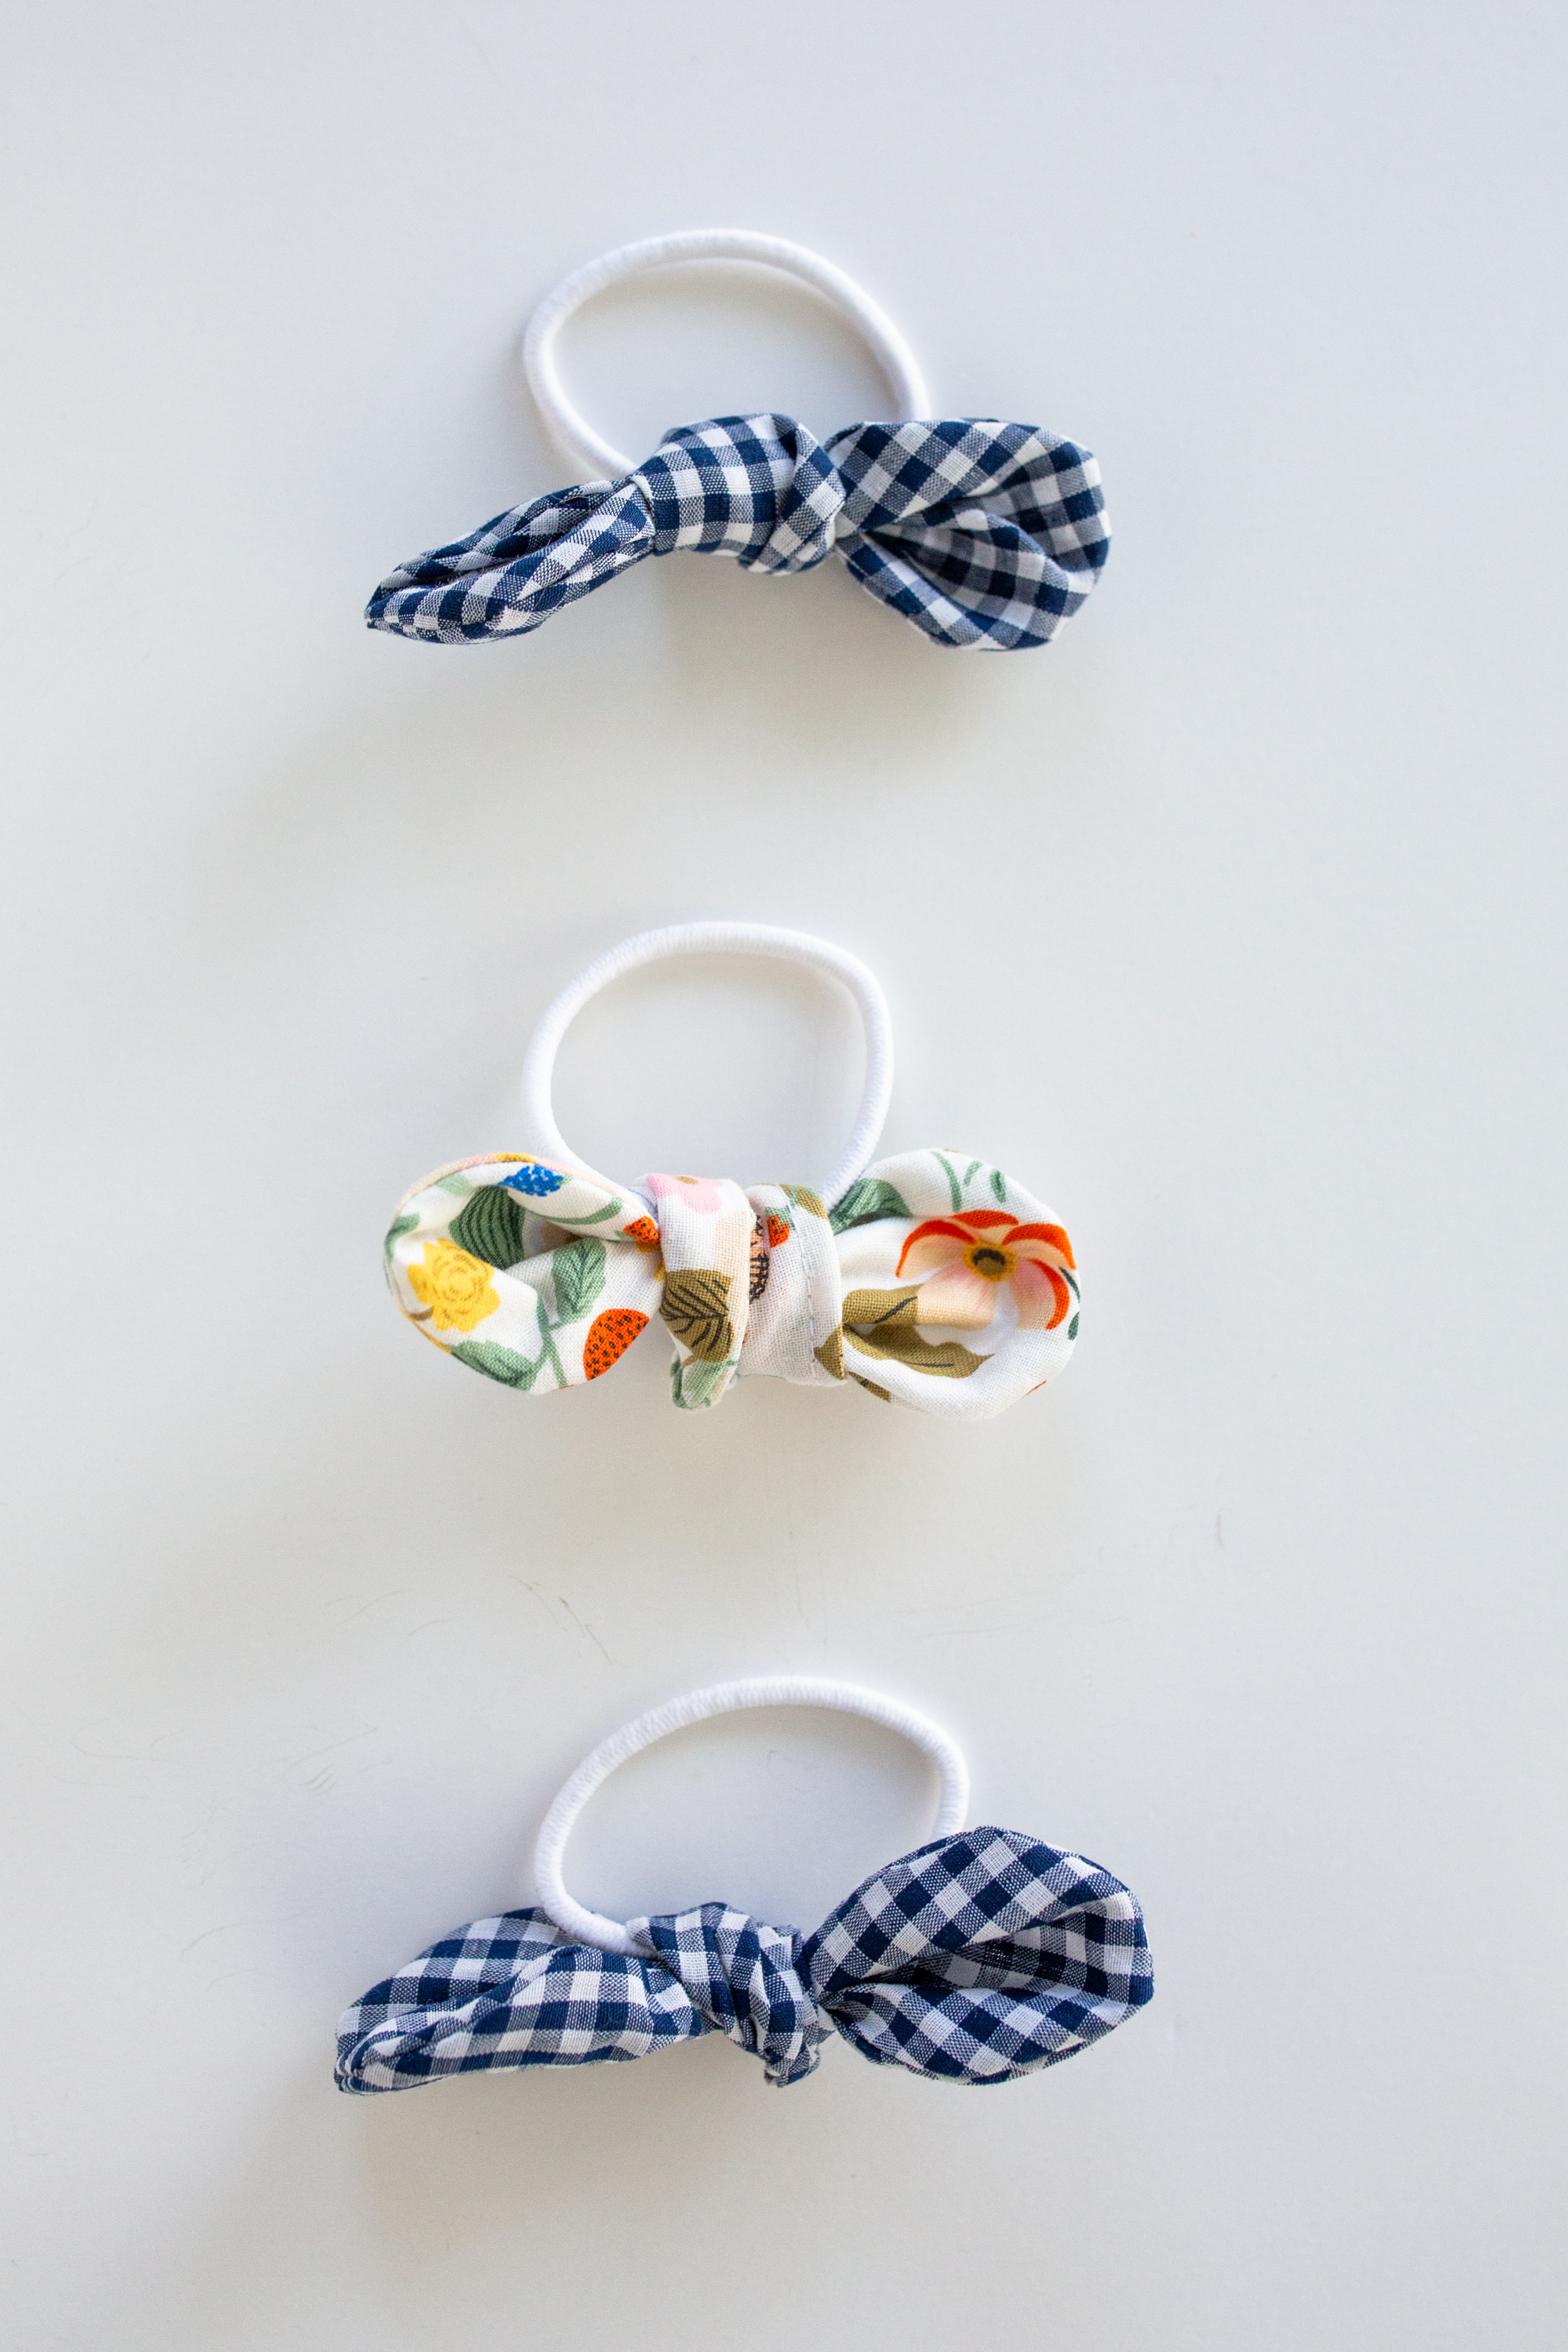 An Easy Handmade Christmas Gift Idea / Christmas Homemade Gift Idea / Rifle Paper Co. / Easy Sewing Project for Beginners / Easy Sewing Gifts / DIY Sewing Gifts / Bow Hair Tie / GIngham Print / Hair Accessories - Sunshine Style, A Florida Based Fashion and Lifestyle Blog by Katie